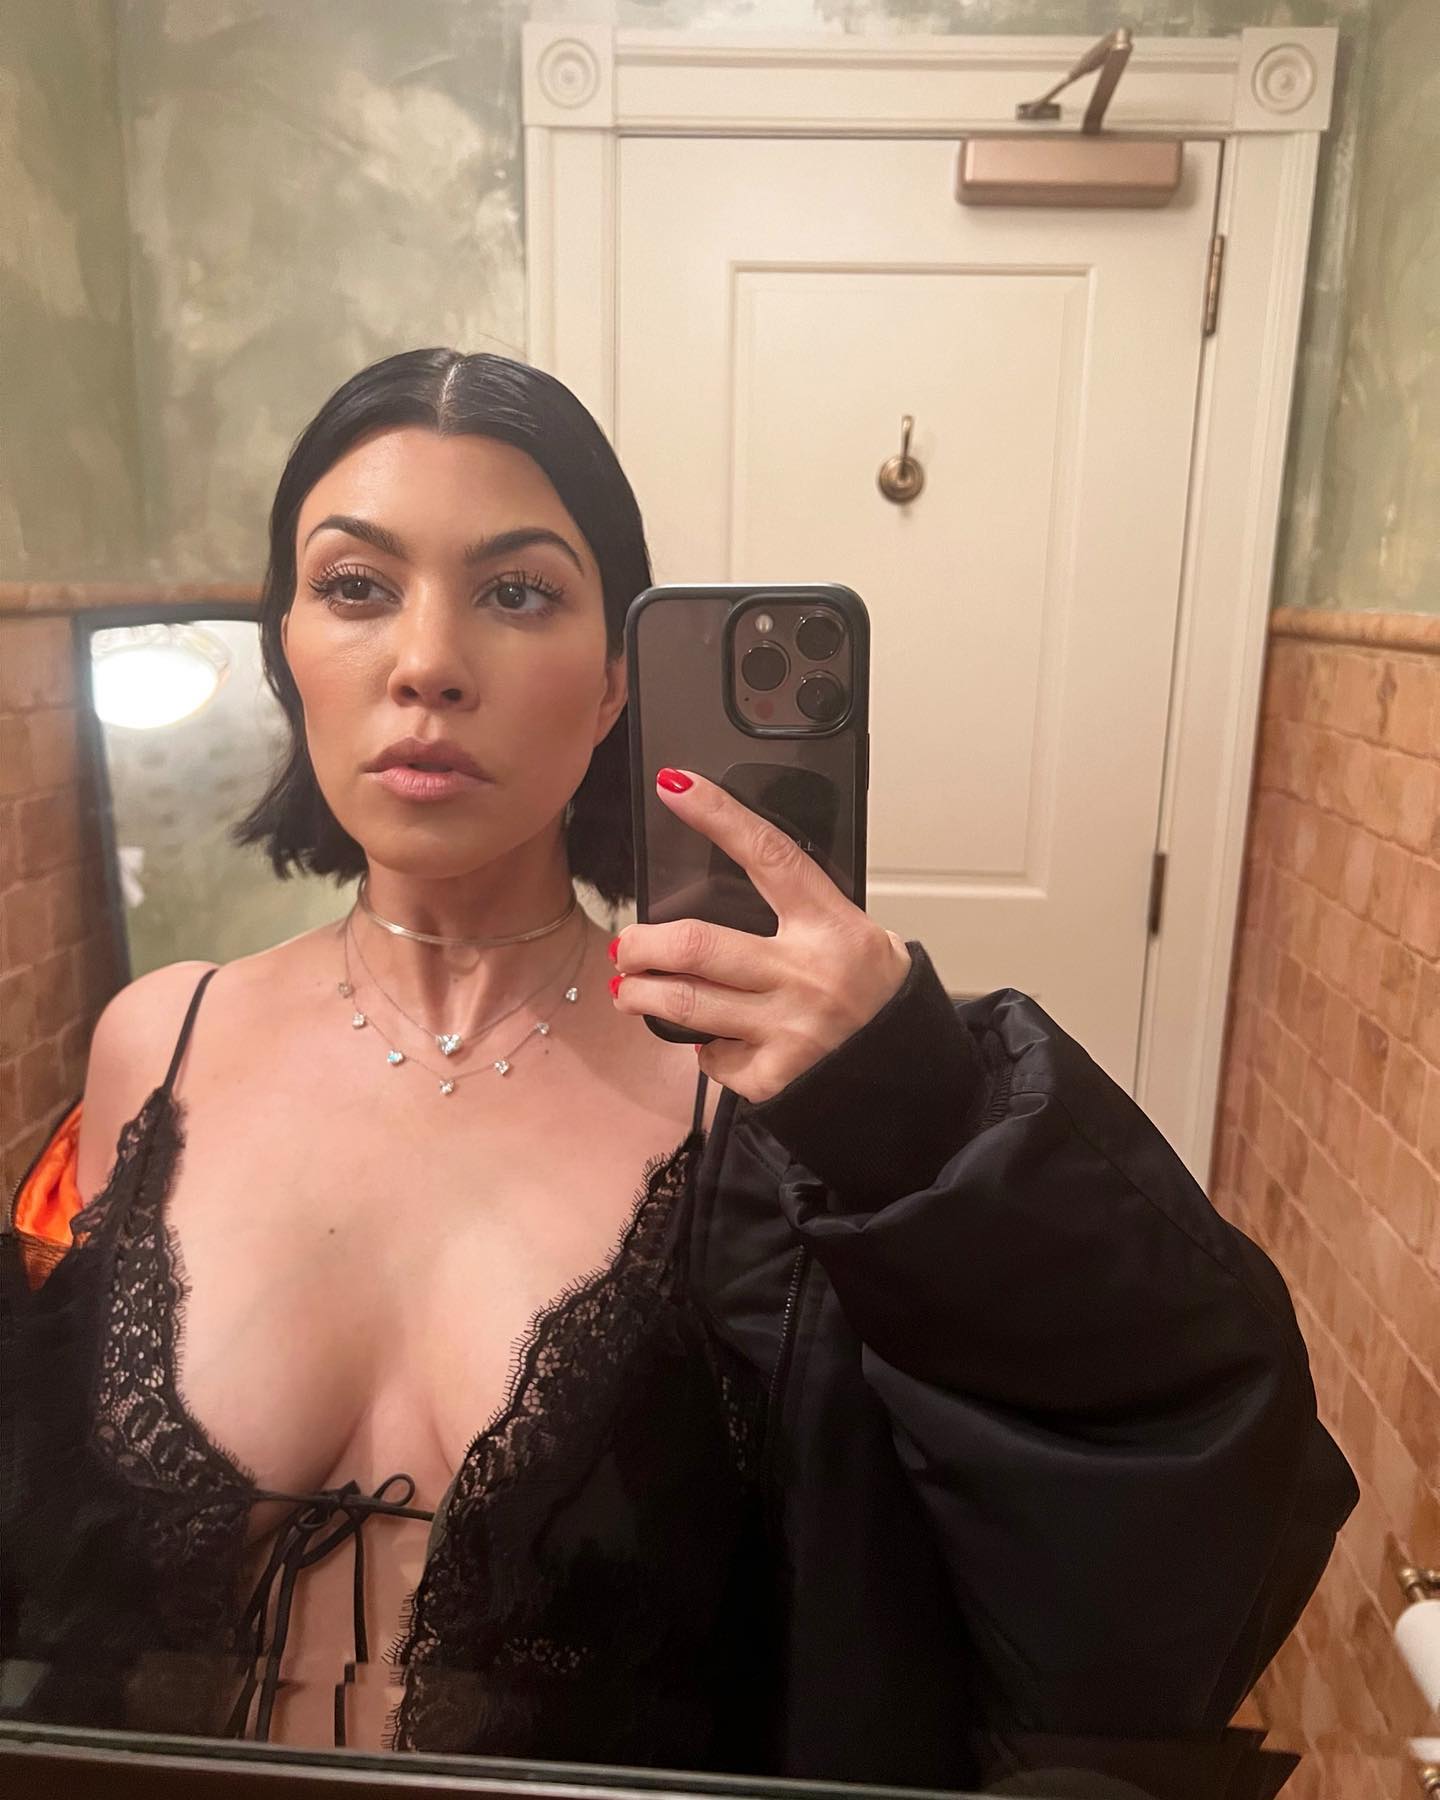 One time, Kourtney even showed off her lingerie on her Instagram Story while taking a bathroom mirror selfie